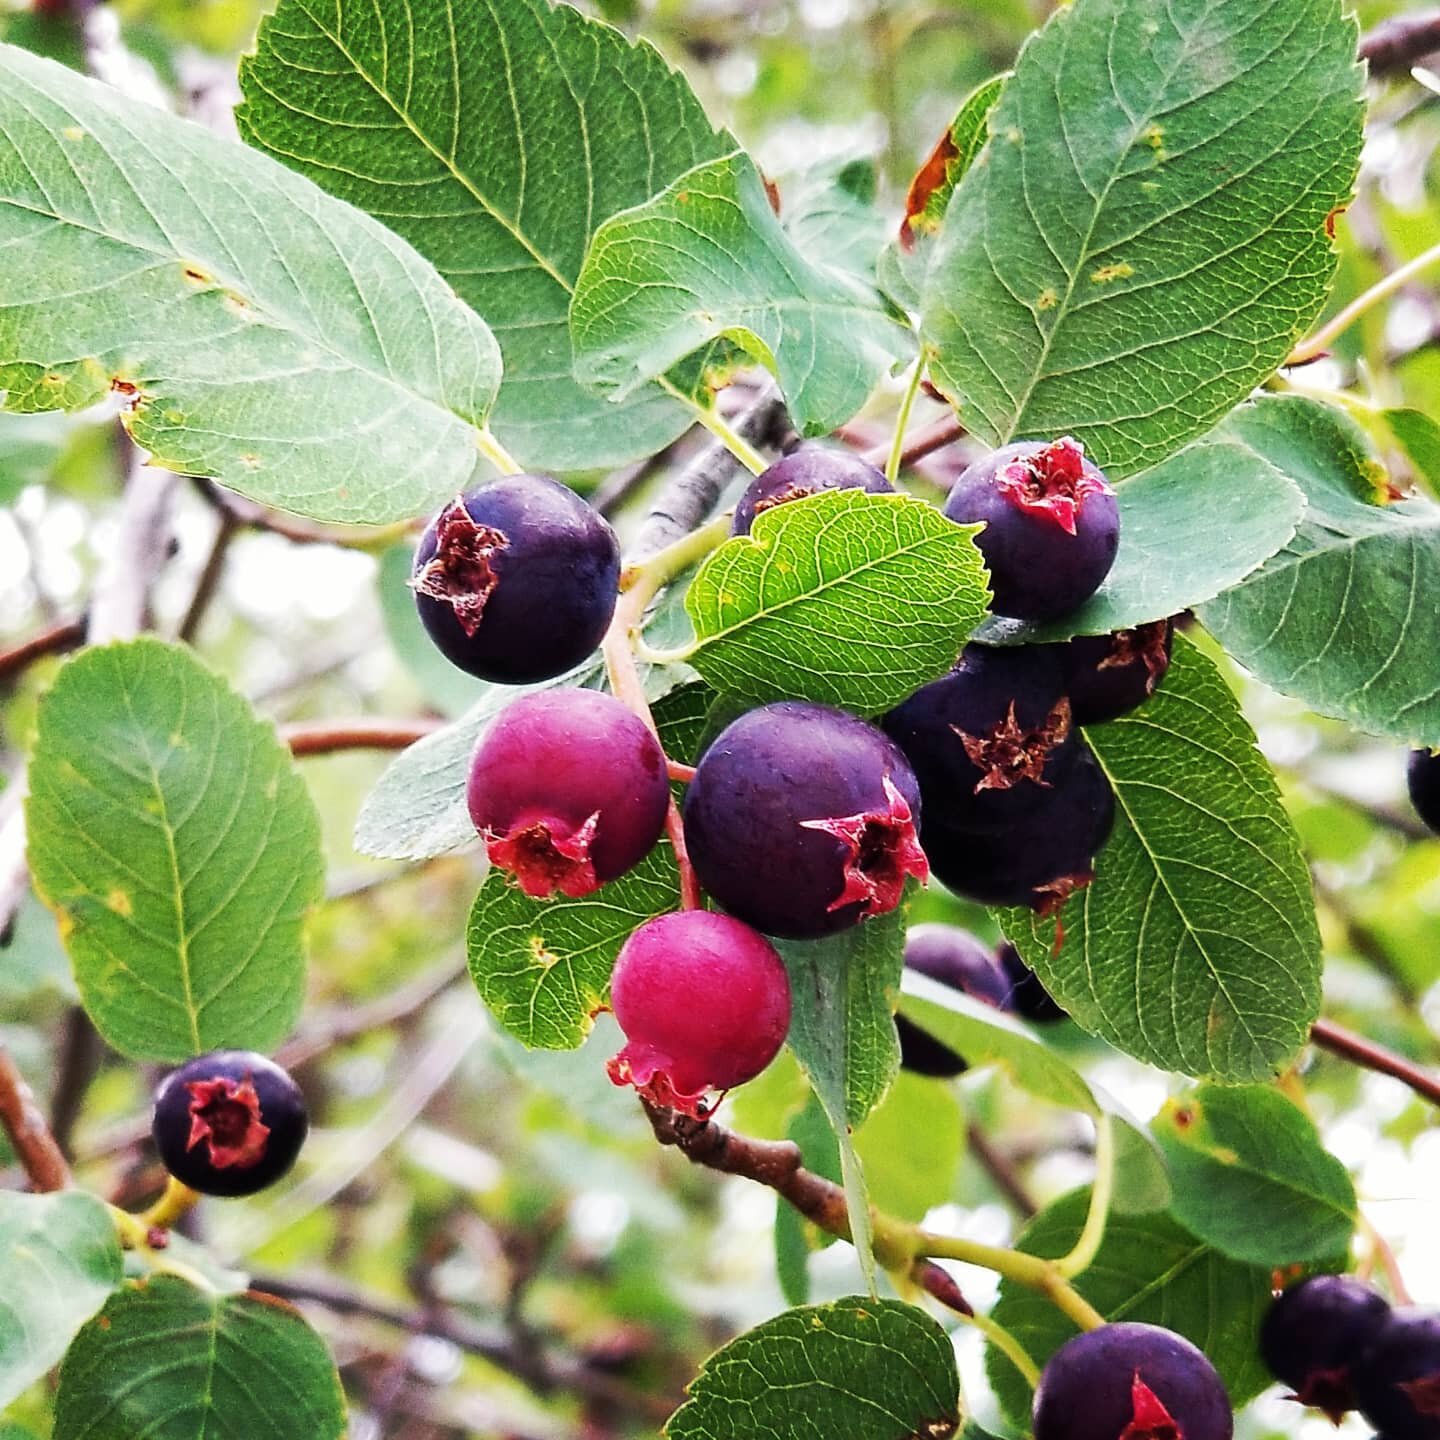 It's time for Saskatoons.  Check out our latest blog post at www.canningculture.ca or www.canningculture.com for ways to preserve and bake with these delicious and free berries. #canningculture #ballcanning #bernardin #cannedfruit #jars #environmenta